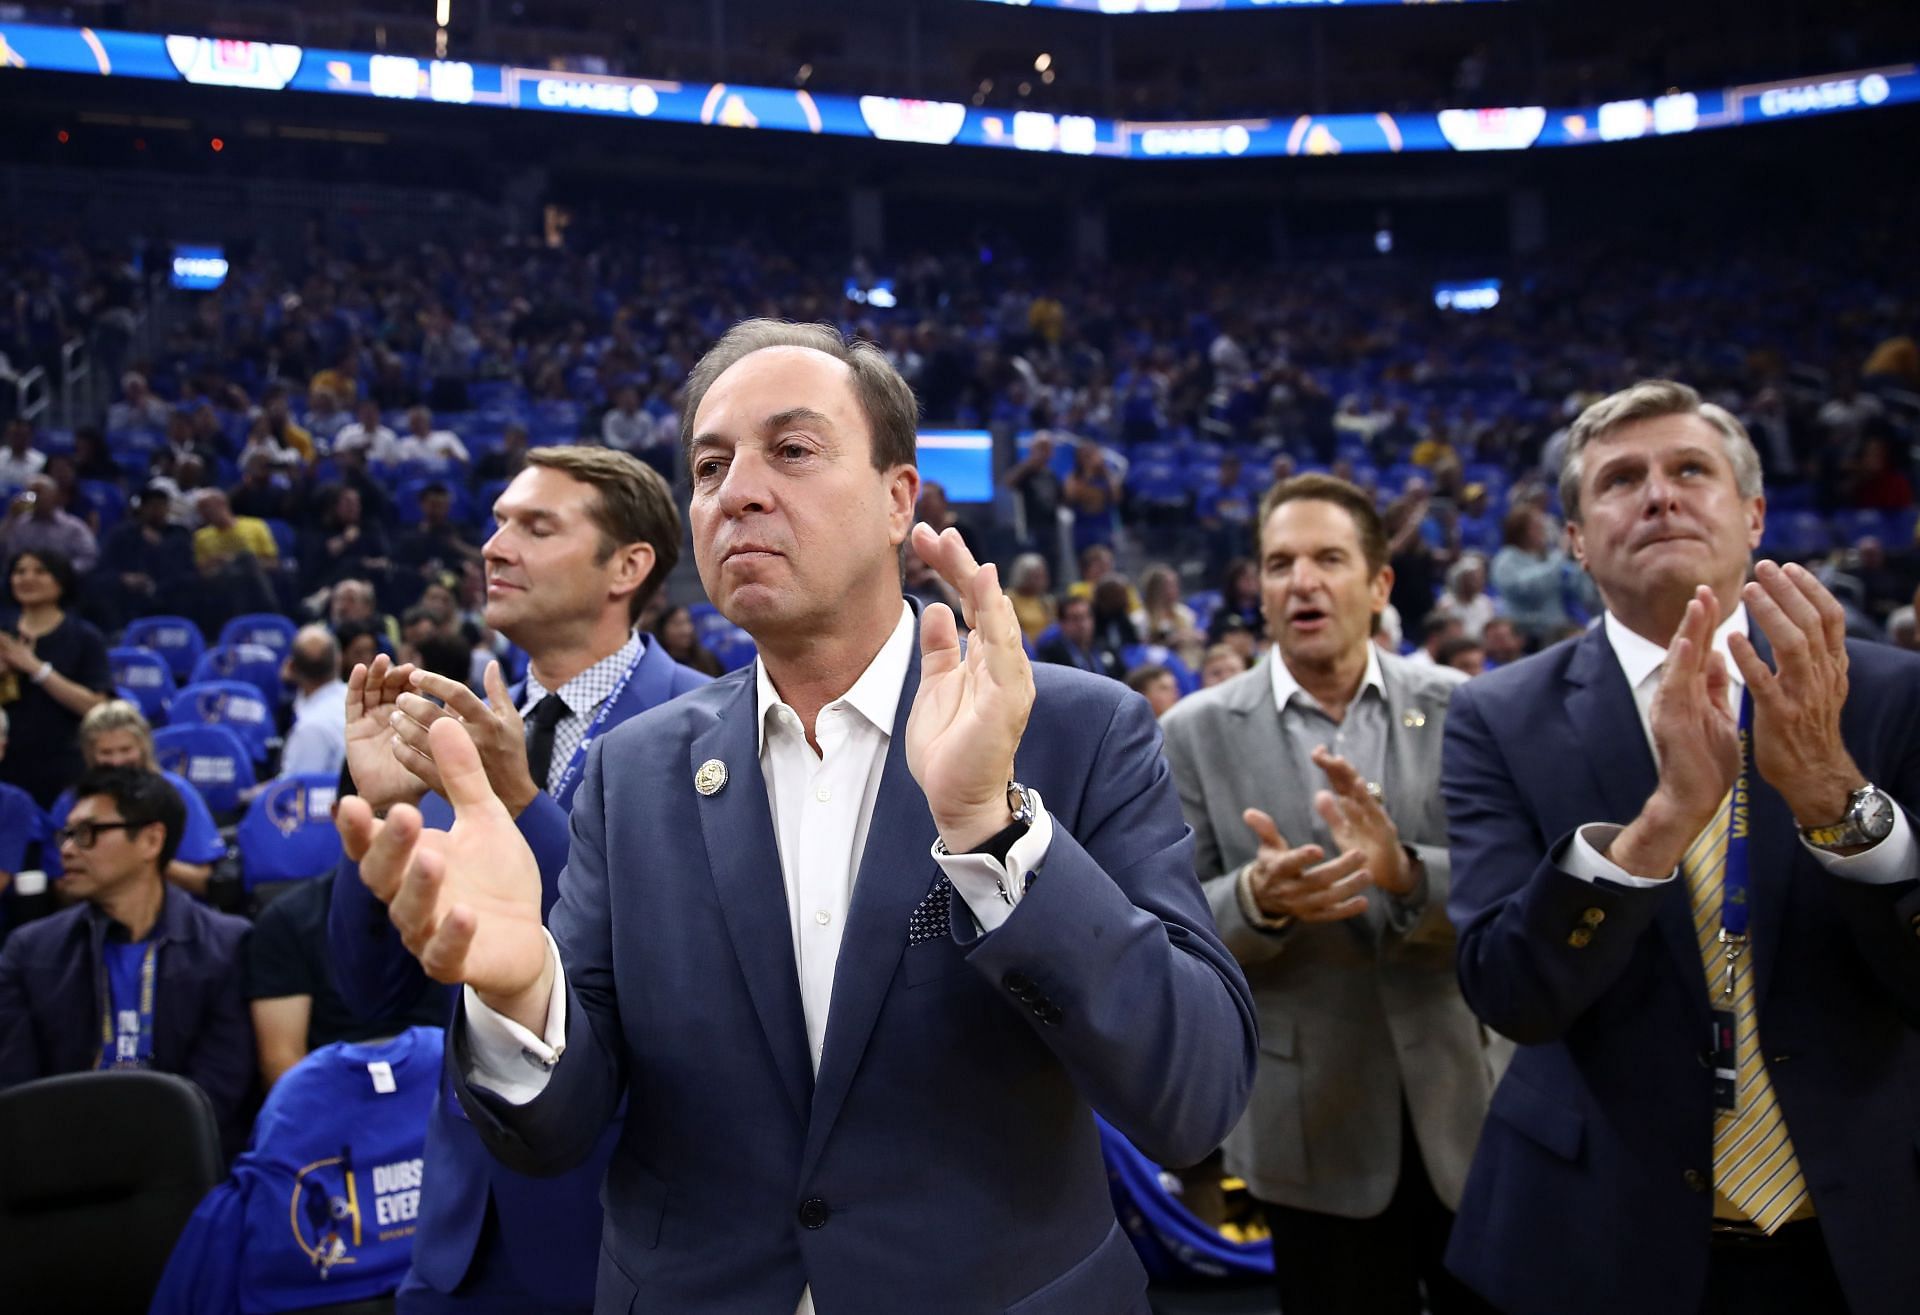 Joe Lacob has owned Golden State since 2010